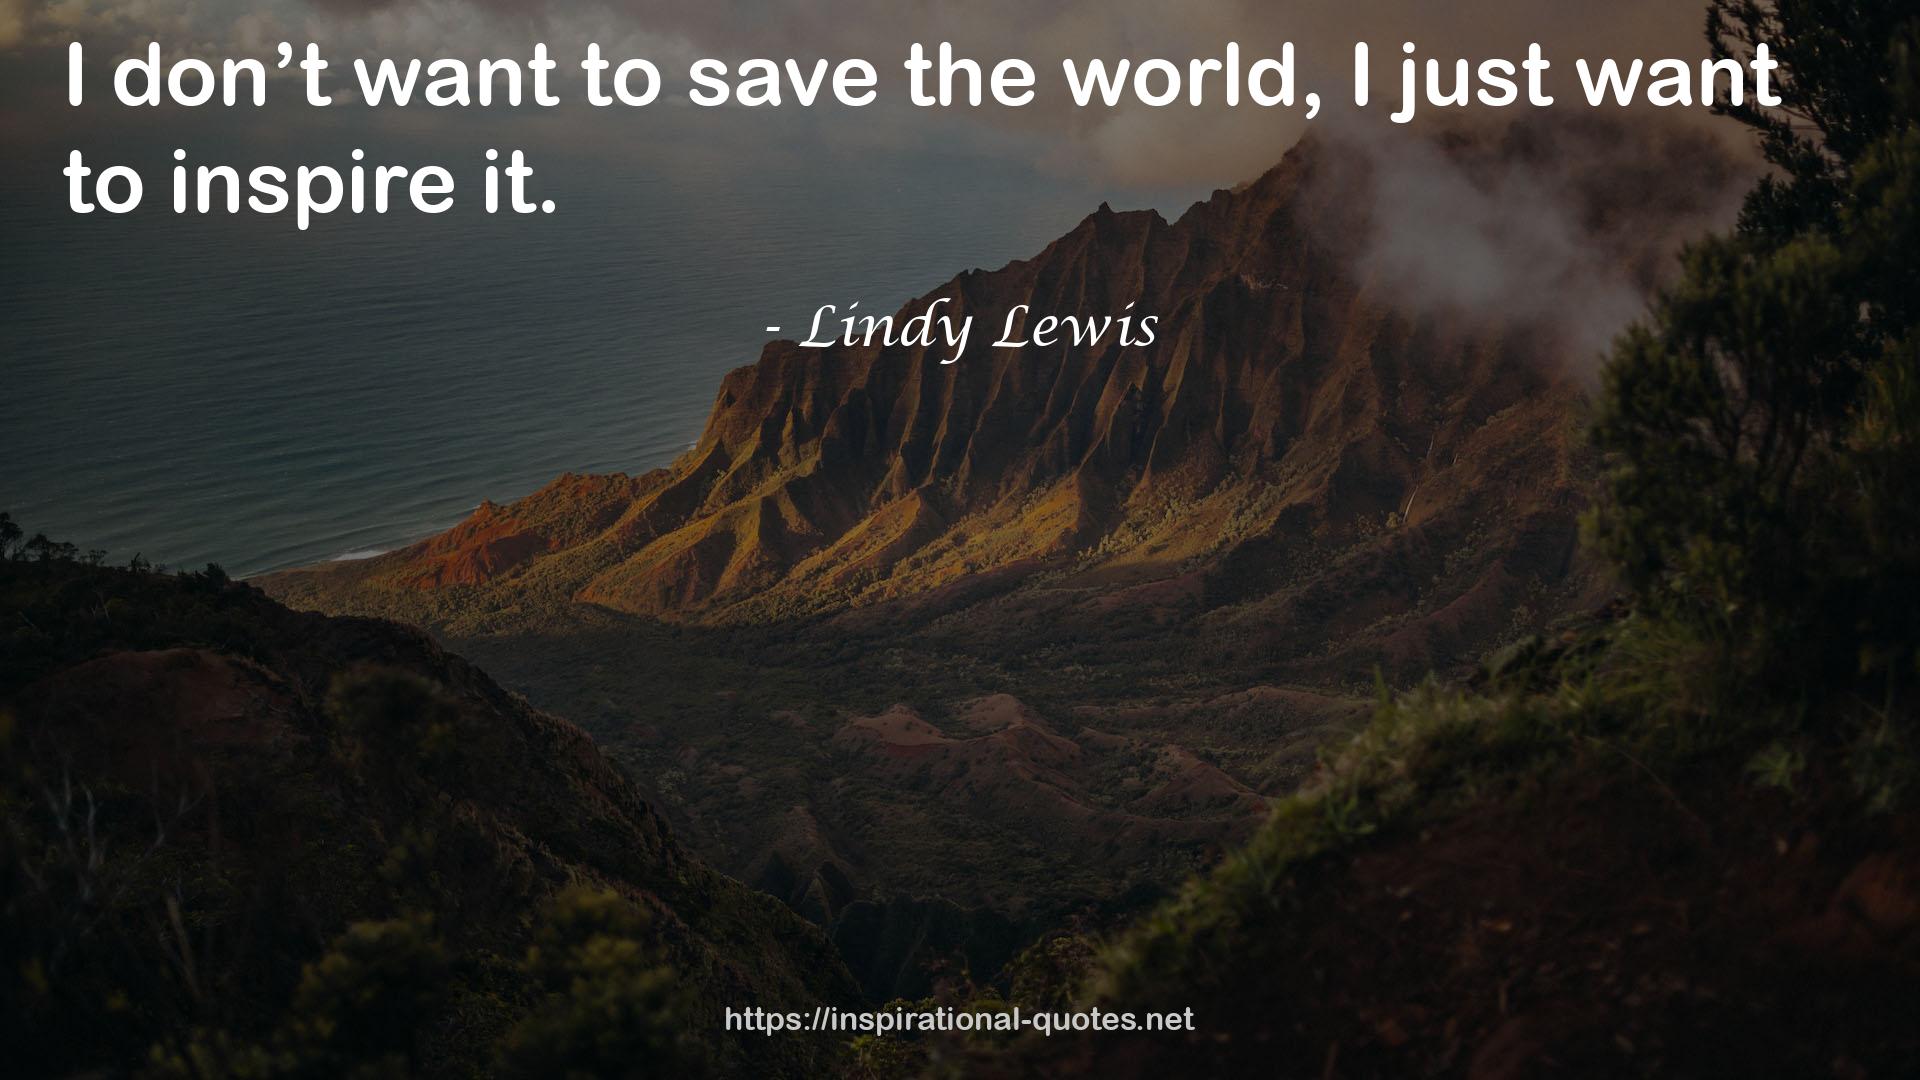 Lindy Lewis QUOTES